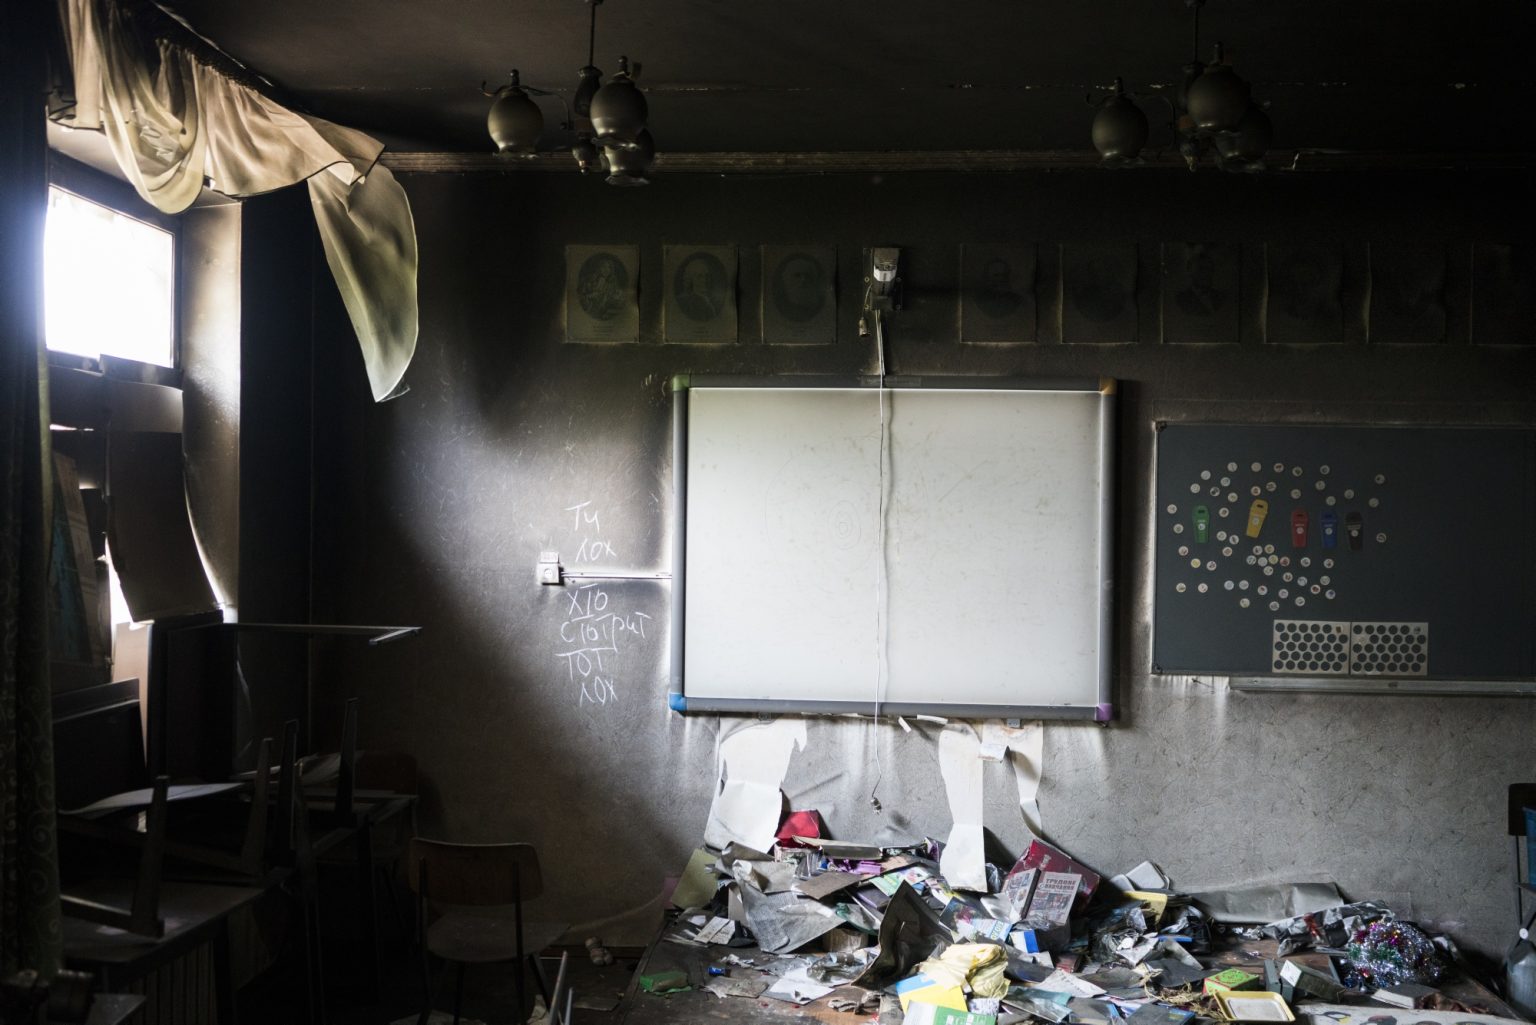 UKRAINE, Kyiv. May 12, 2022 - A school used as a base by Russian forces and burned down by them during their retreating from the village of Bohdanivka.